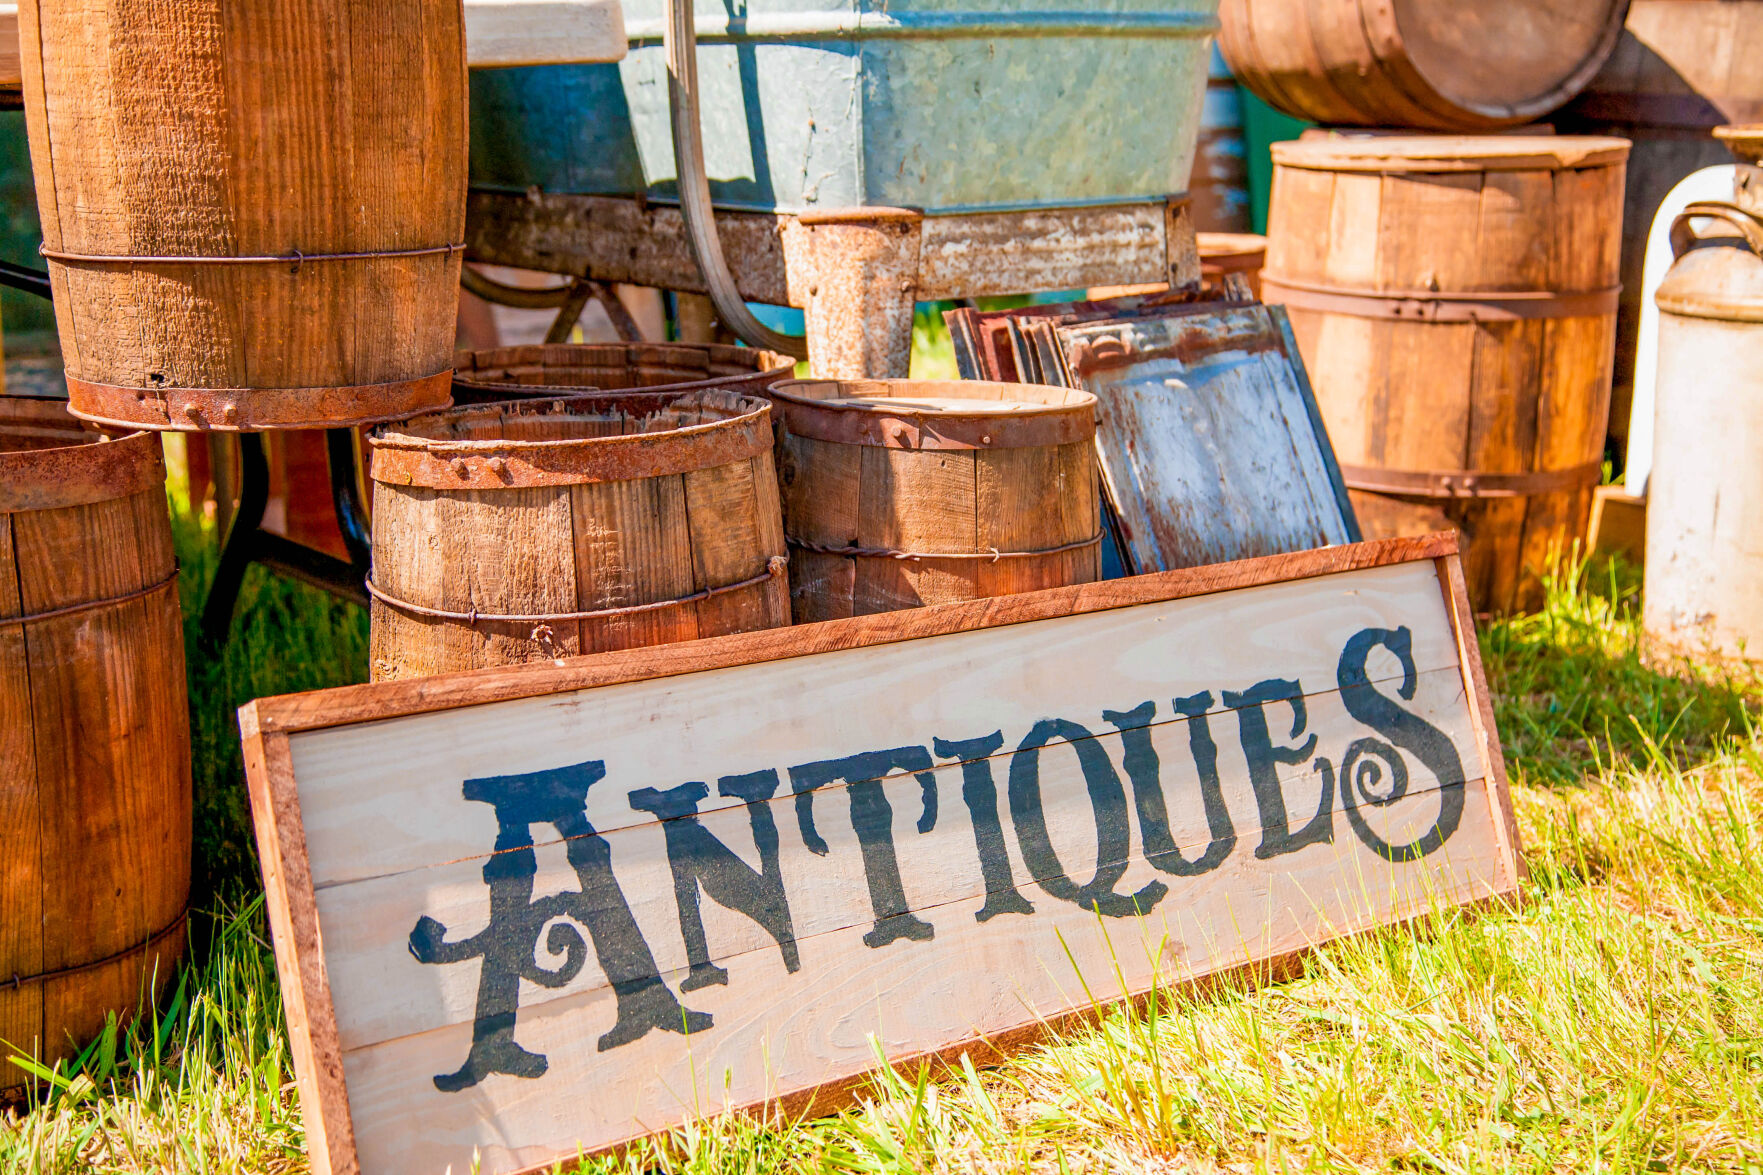 To be considered an antique, an item has to be at least 100 years old. The term “vintage” is used for items that are at least 40 years old. “Retro” are items that are at least 20 years old, but less than 40 years old.    PHOTO CREDIT: Metro Creative